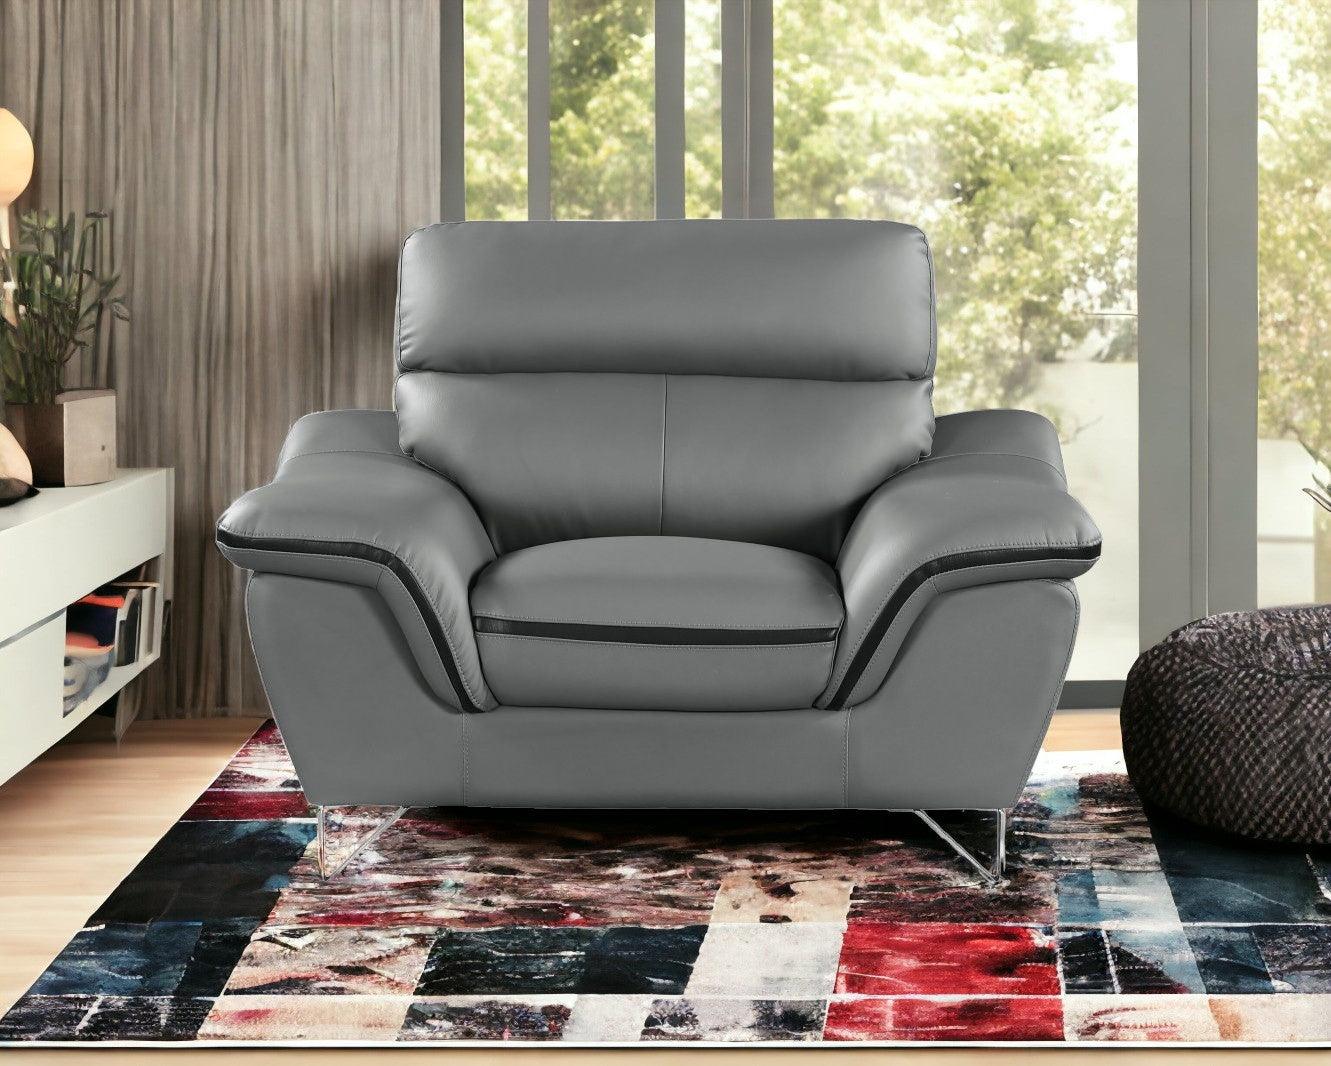 Three Piece Indoor Gray Genuine Leather Six Person Seating Set - FurniFindUSA